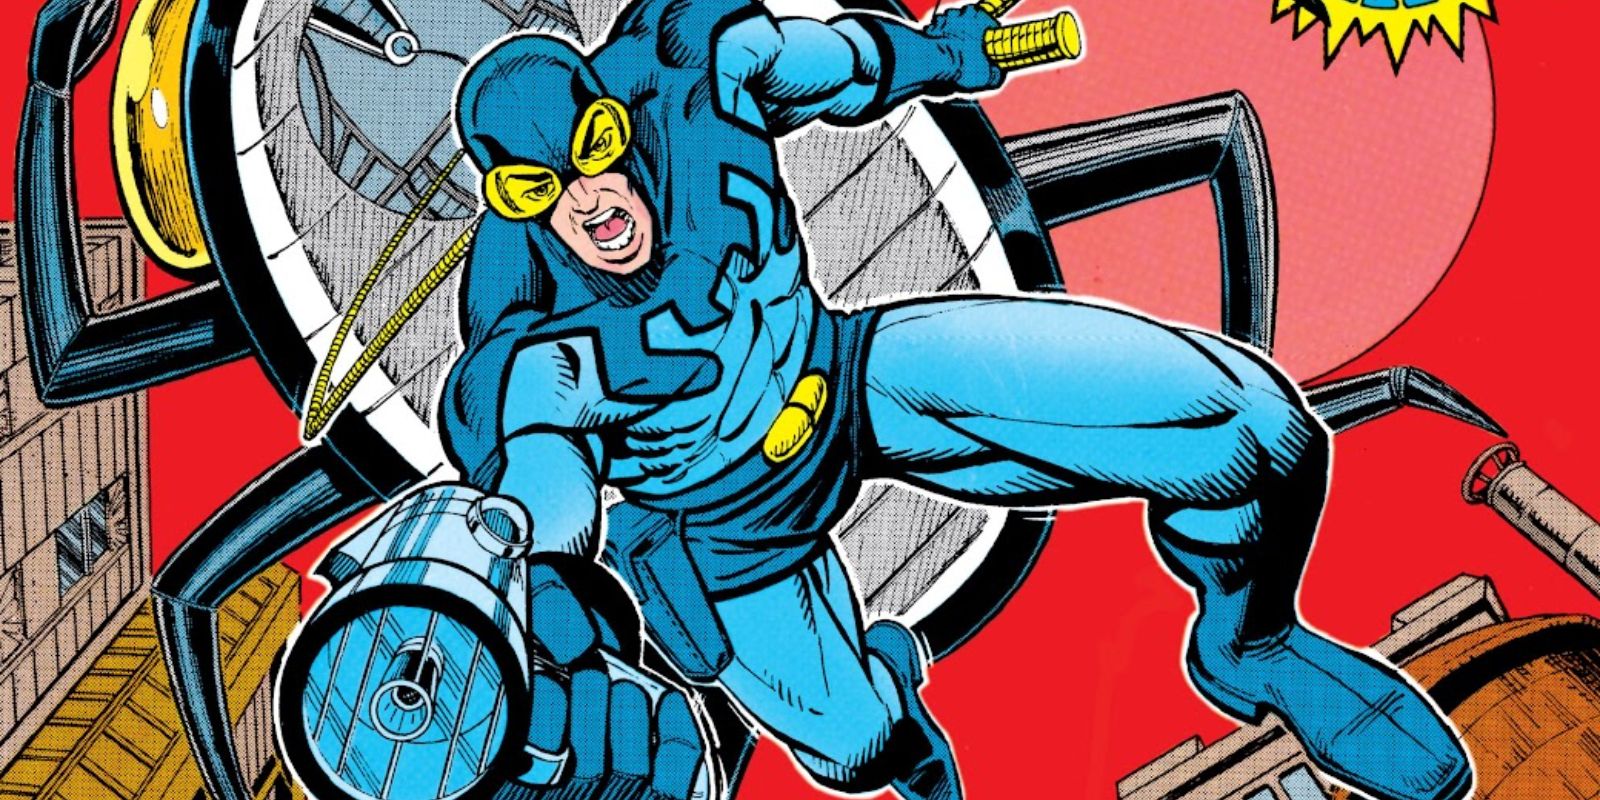 Ted Kord's Blue Beetle diving down from the sky with a blaster in hand in DC Comics